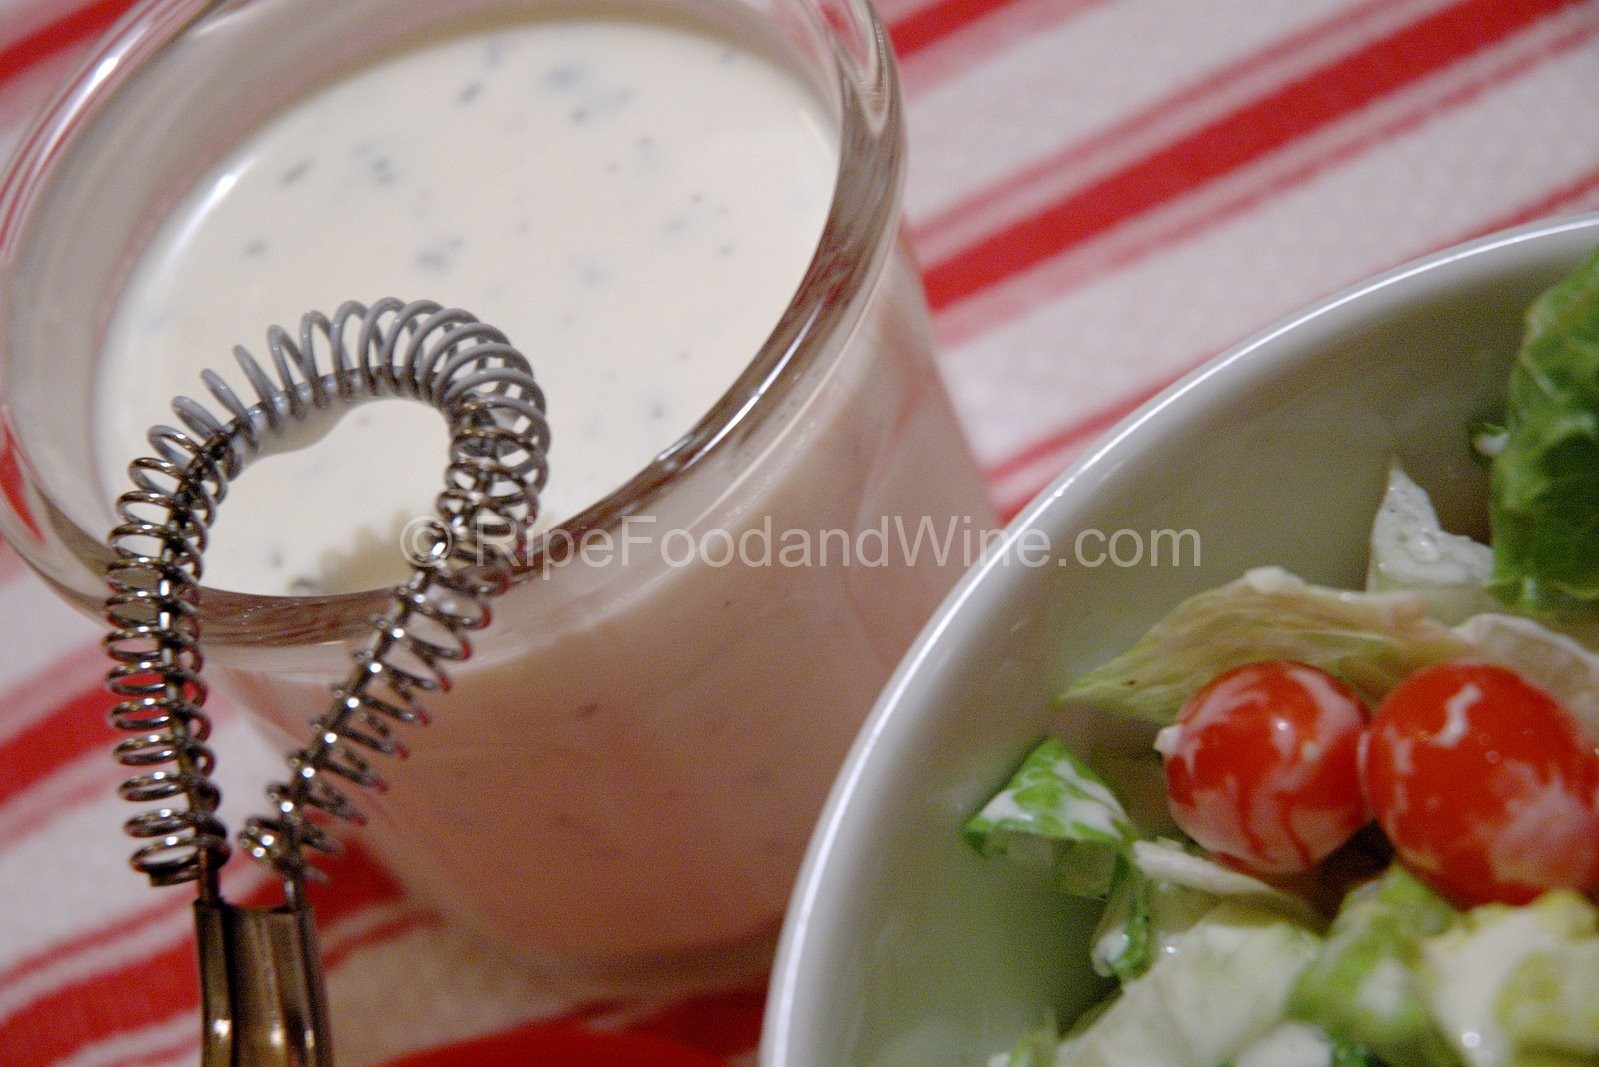 Ranch Dressing (without the yucky stuff)